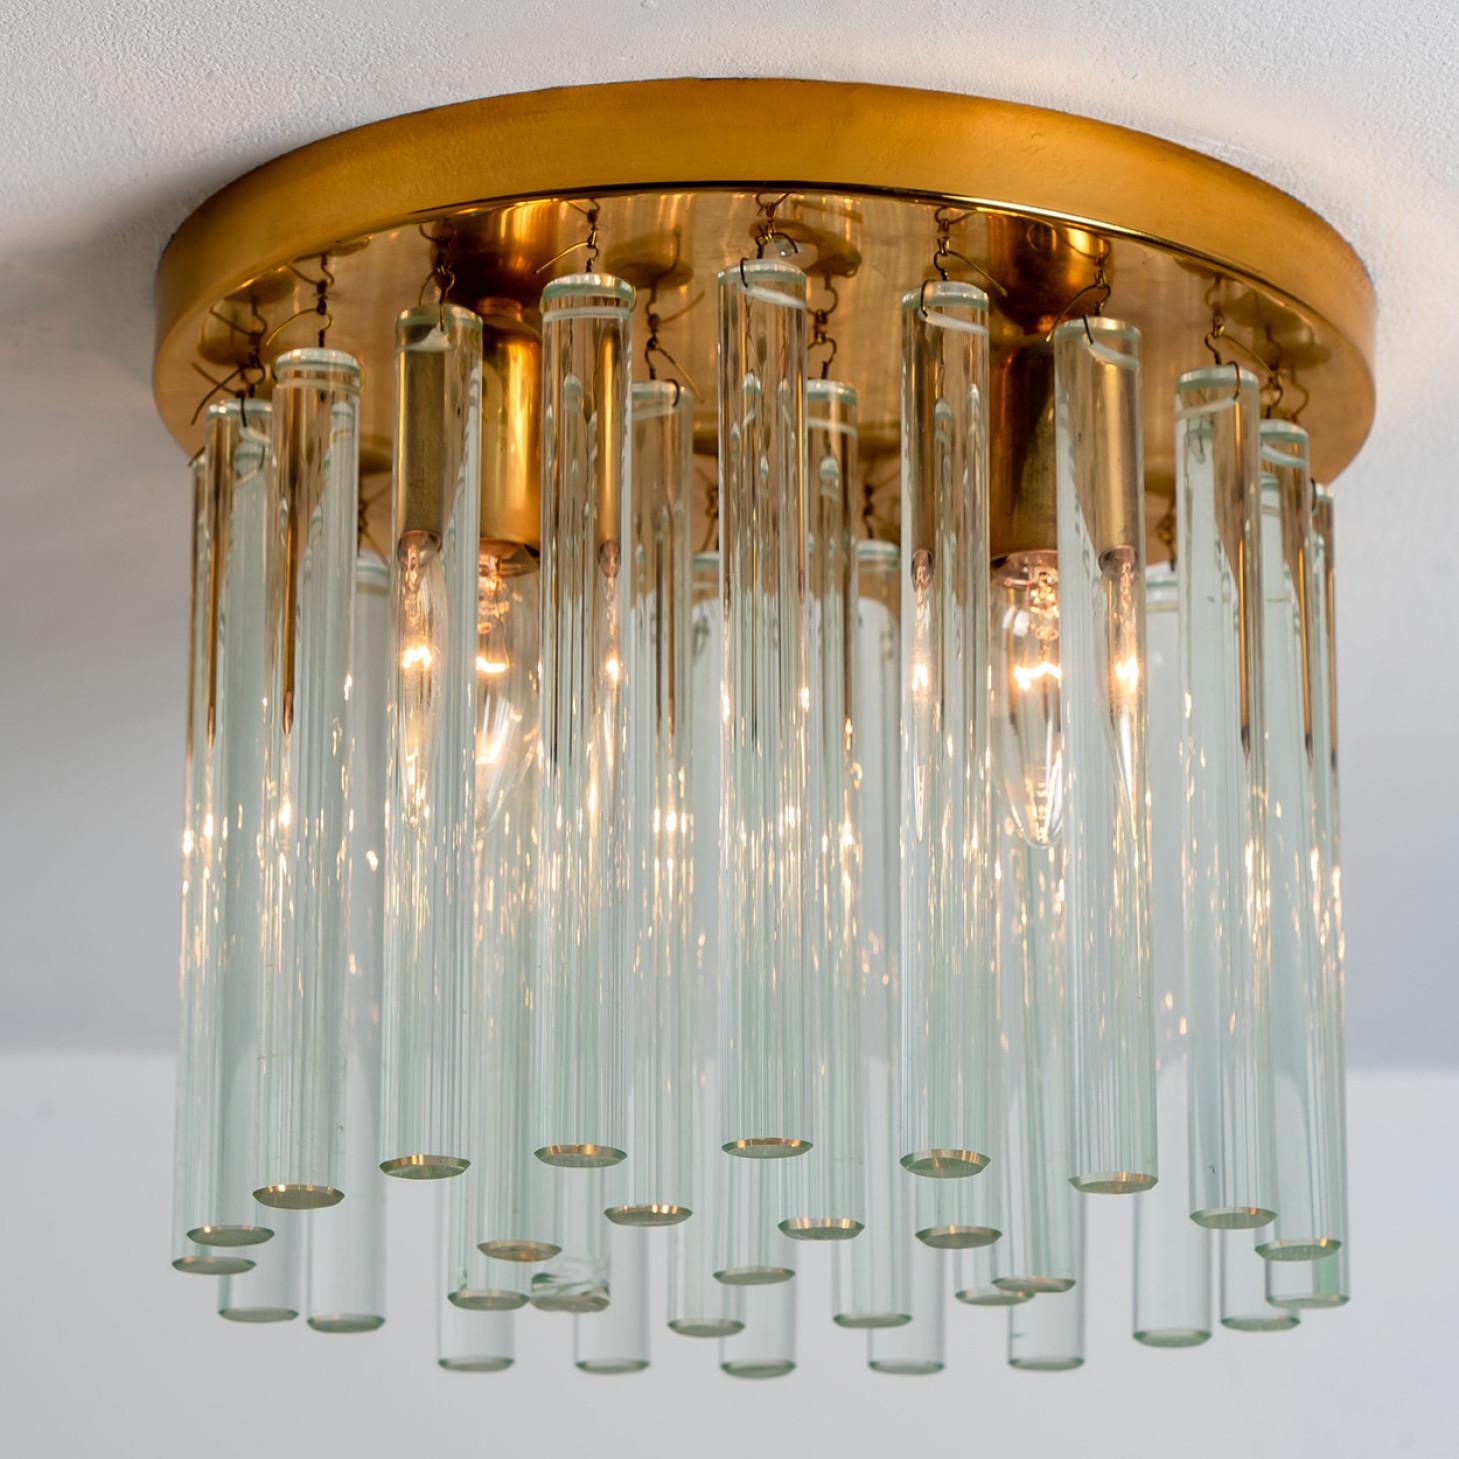 High quality midcentury brass and clear crystal glass flush mount by Ernst Palme, Germany, 1970s.
The flush has a brass ceiling plate, to which 31 crystal glass elements are attached.

The crystal glass elements will be individually wrapped for safe